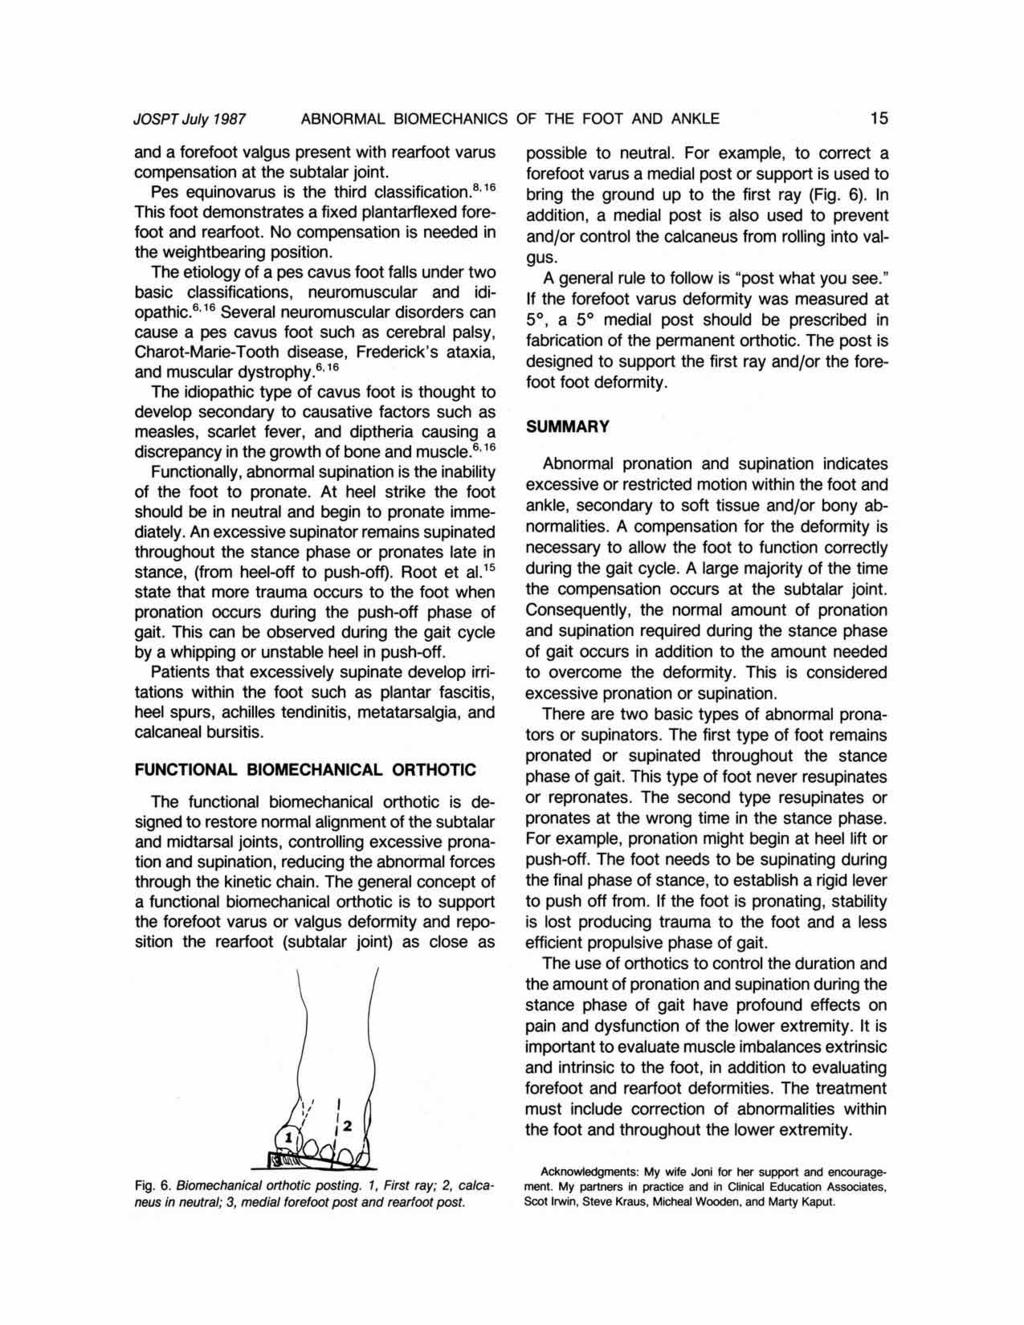 JOSPT July 1987 ABNORMAL BIOMECHANICS OF THE FOOT AND ANKLE 15 and a forefoot valgus present with rearfoot varus compensation at the subtalar joint. Pes equinovarus is the third clas~ification.